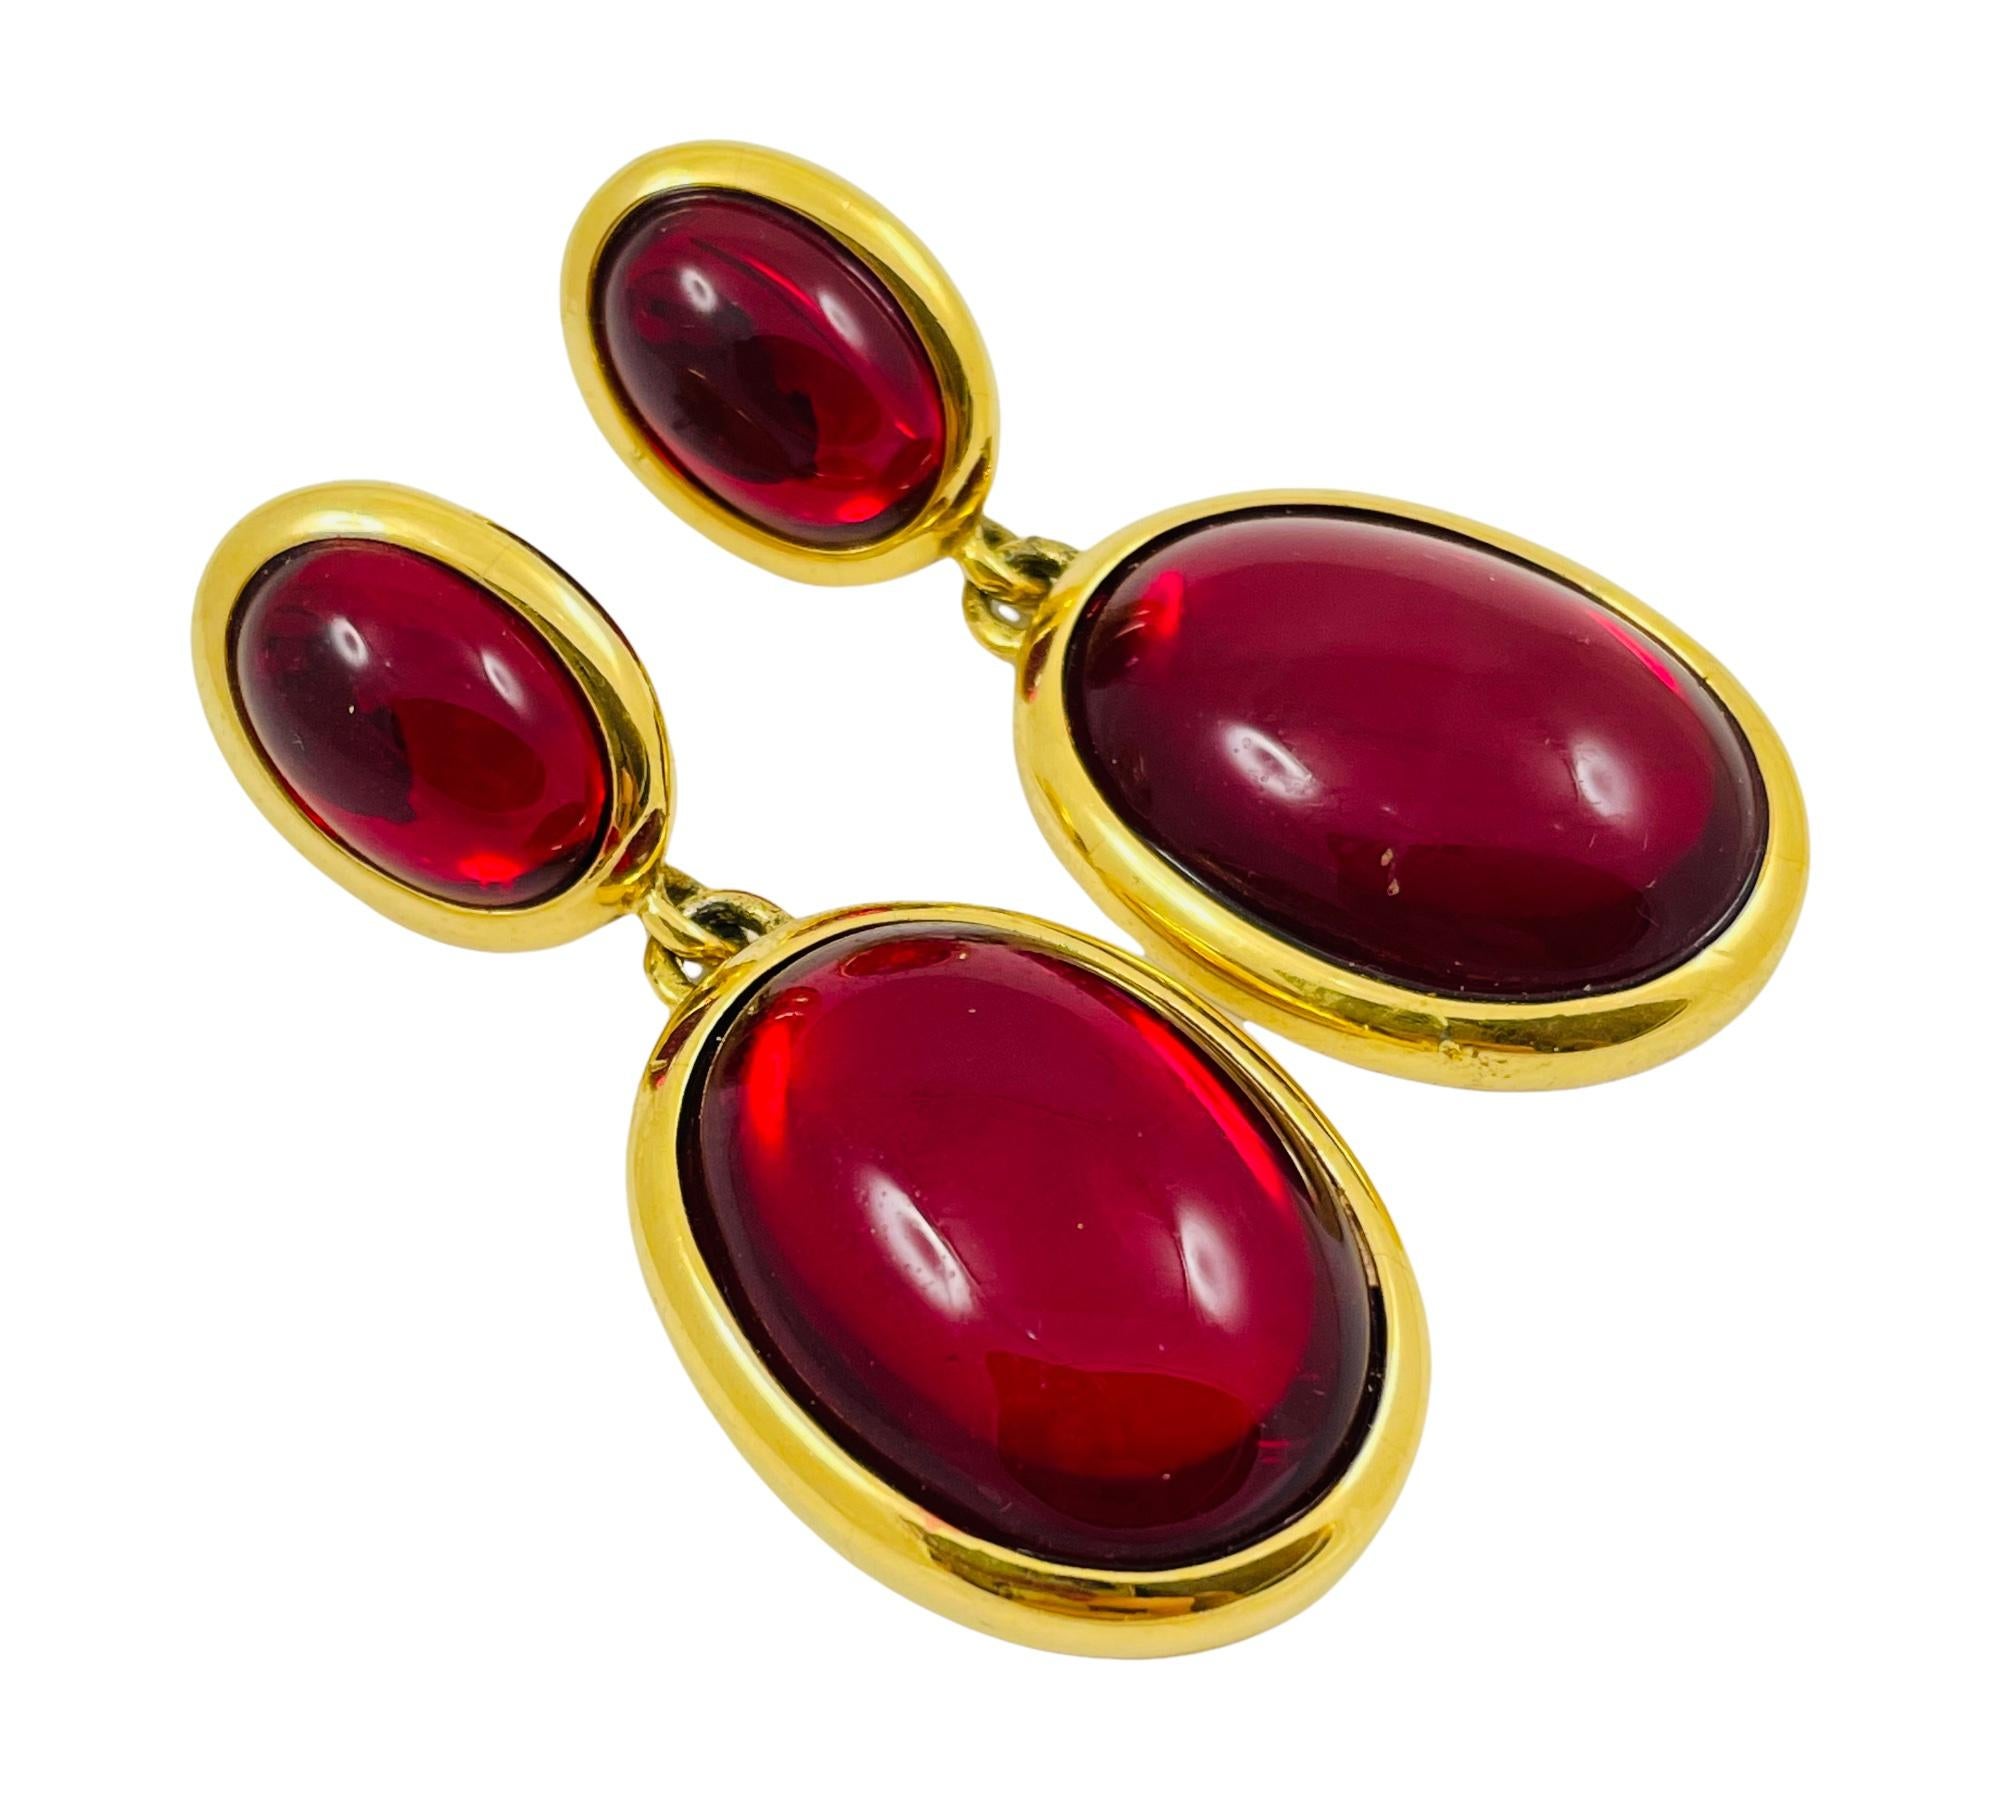 DETAILS

• signed NAPIER

• gold tone

• red glass cabochons

MEASUREMENTS  

• 2” by 0.88”

CONDITION

• excellent vintage condition with minimal signs of wear 

❤️❤️ VINTAGE DESIGNER JEWELRY ❤️❤️ 